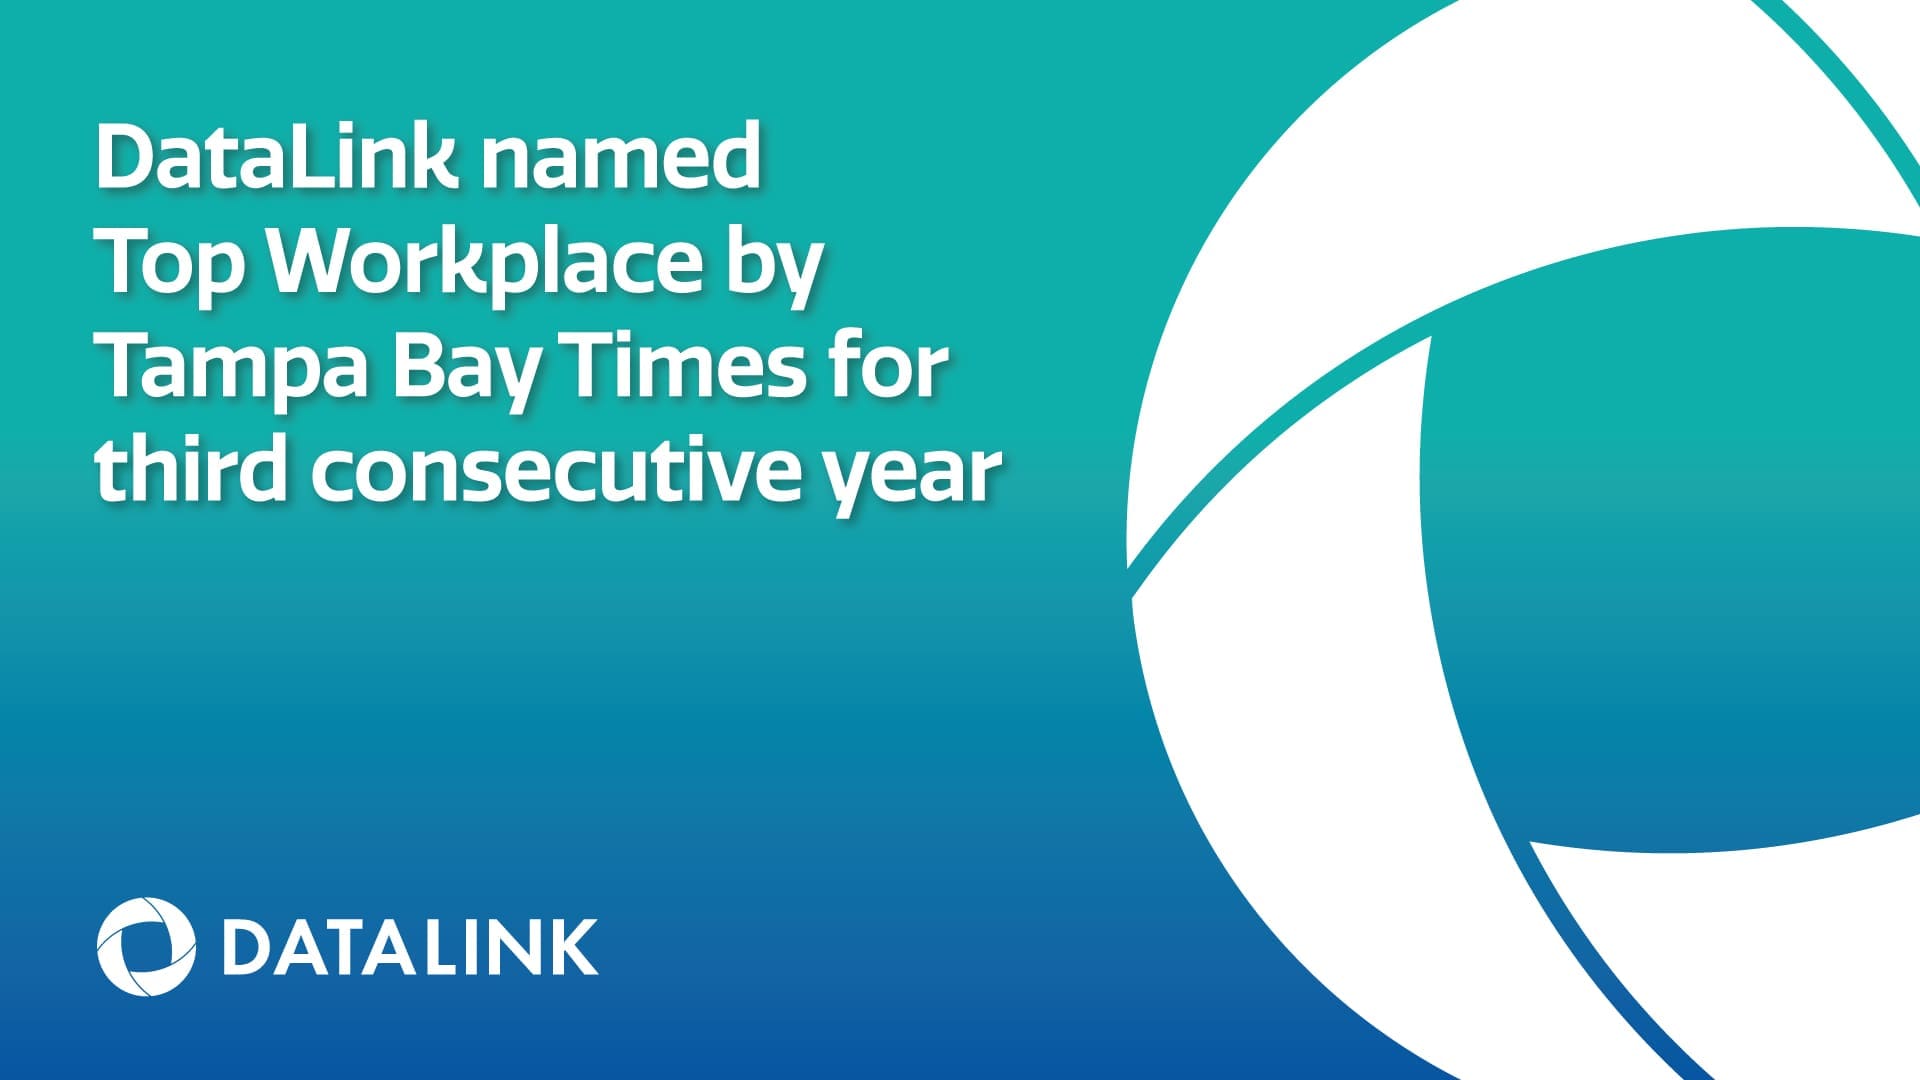 DataLink named Top Workplace by Tampa Bay Times for third consecutive year